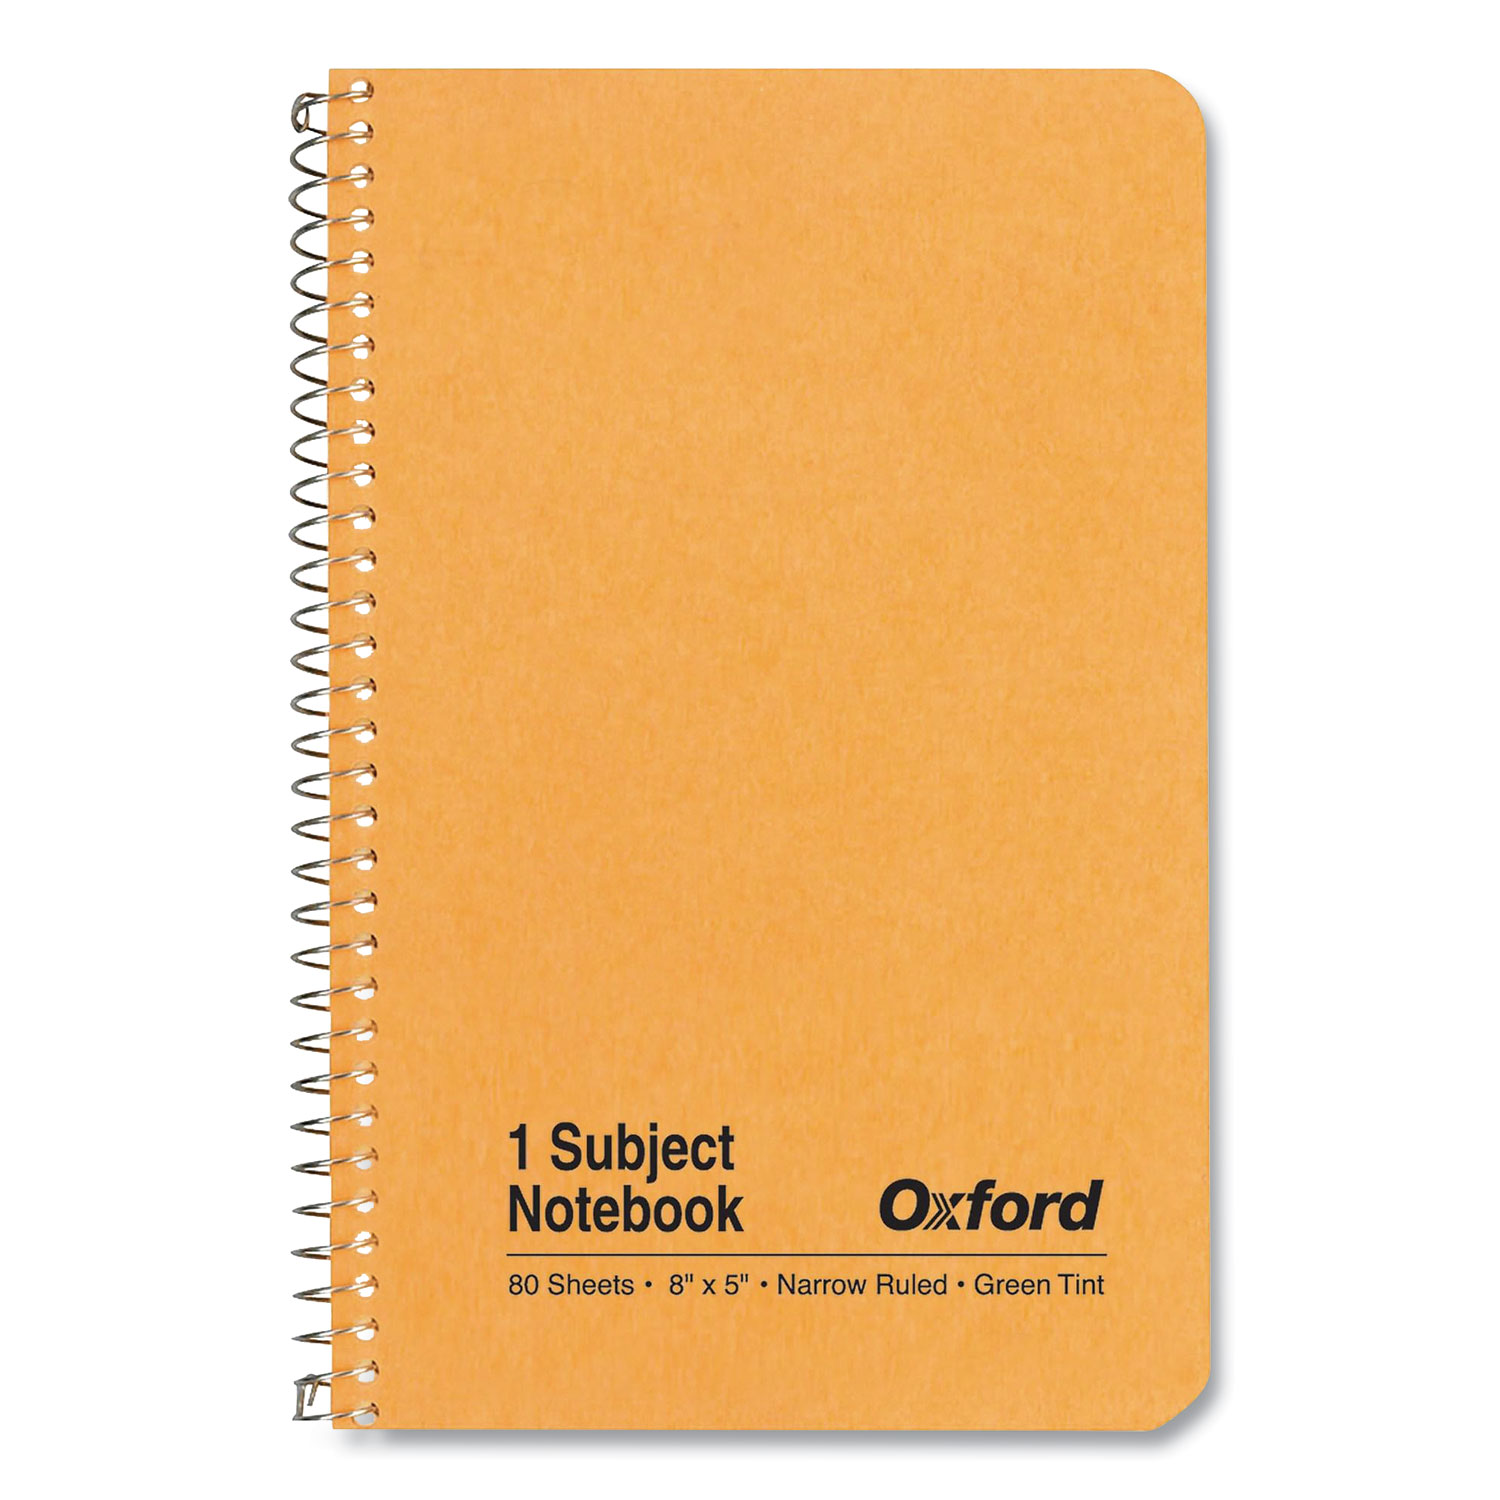 Oxford™ One-Subject Notebook, Narrow Rule, Kraft Cover, 5 x 8, 80 Green Tint Sheets